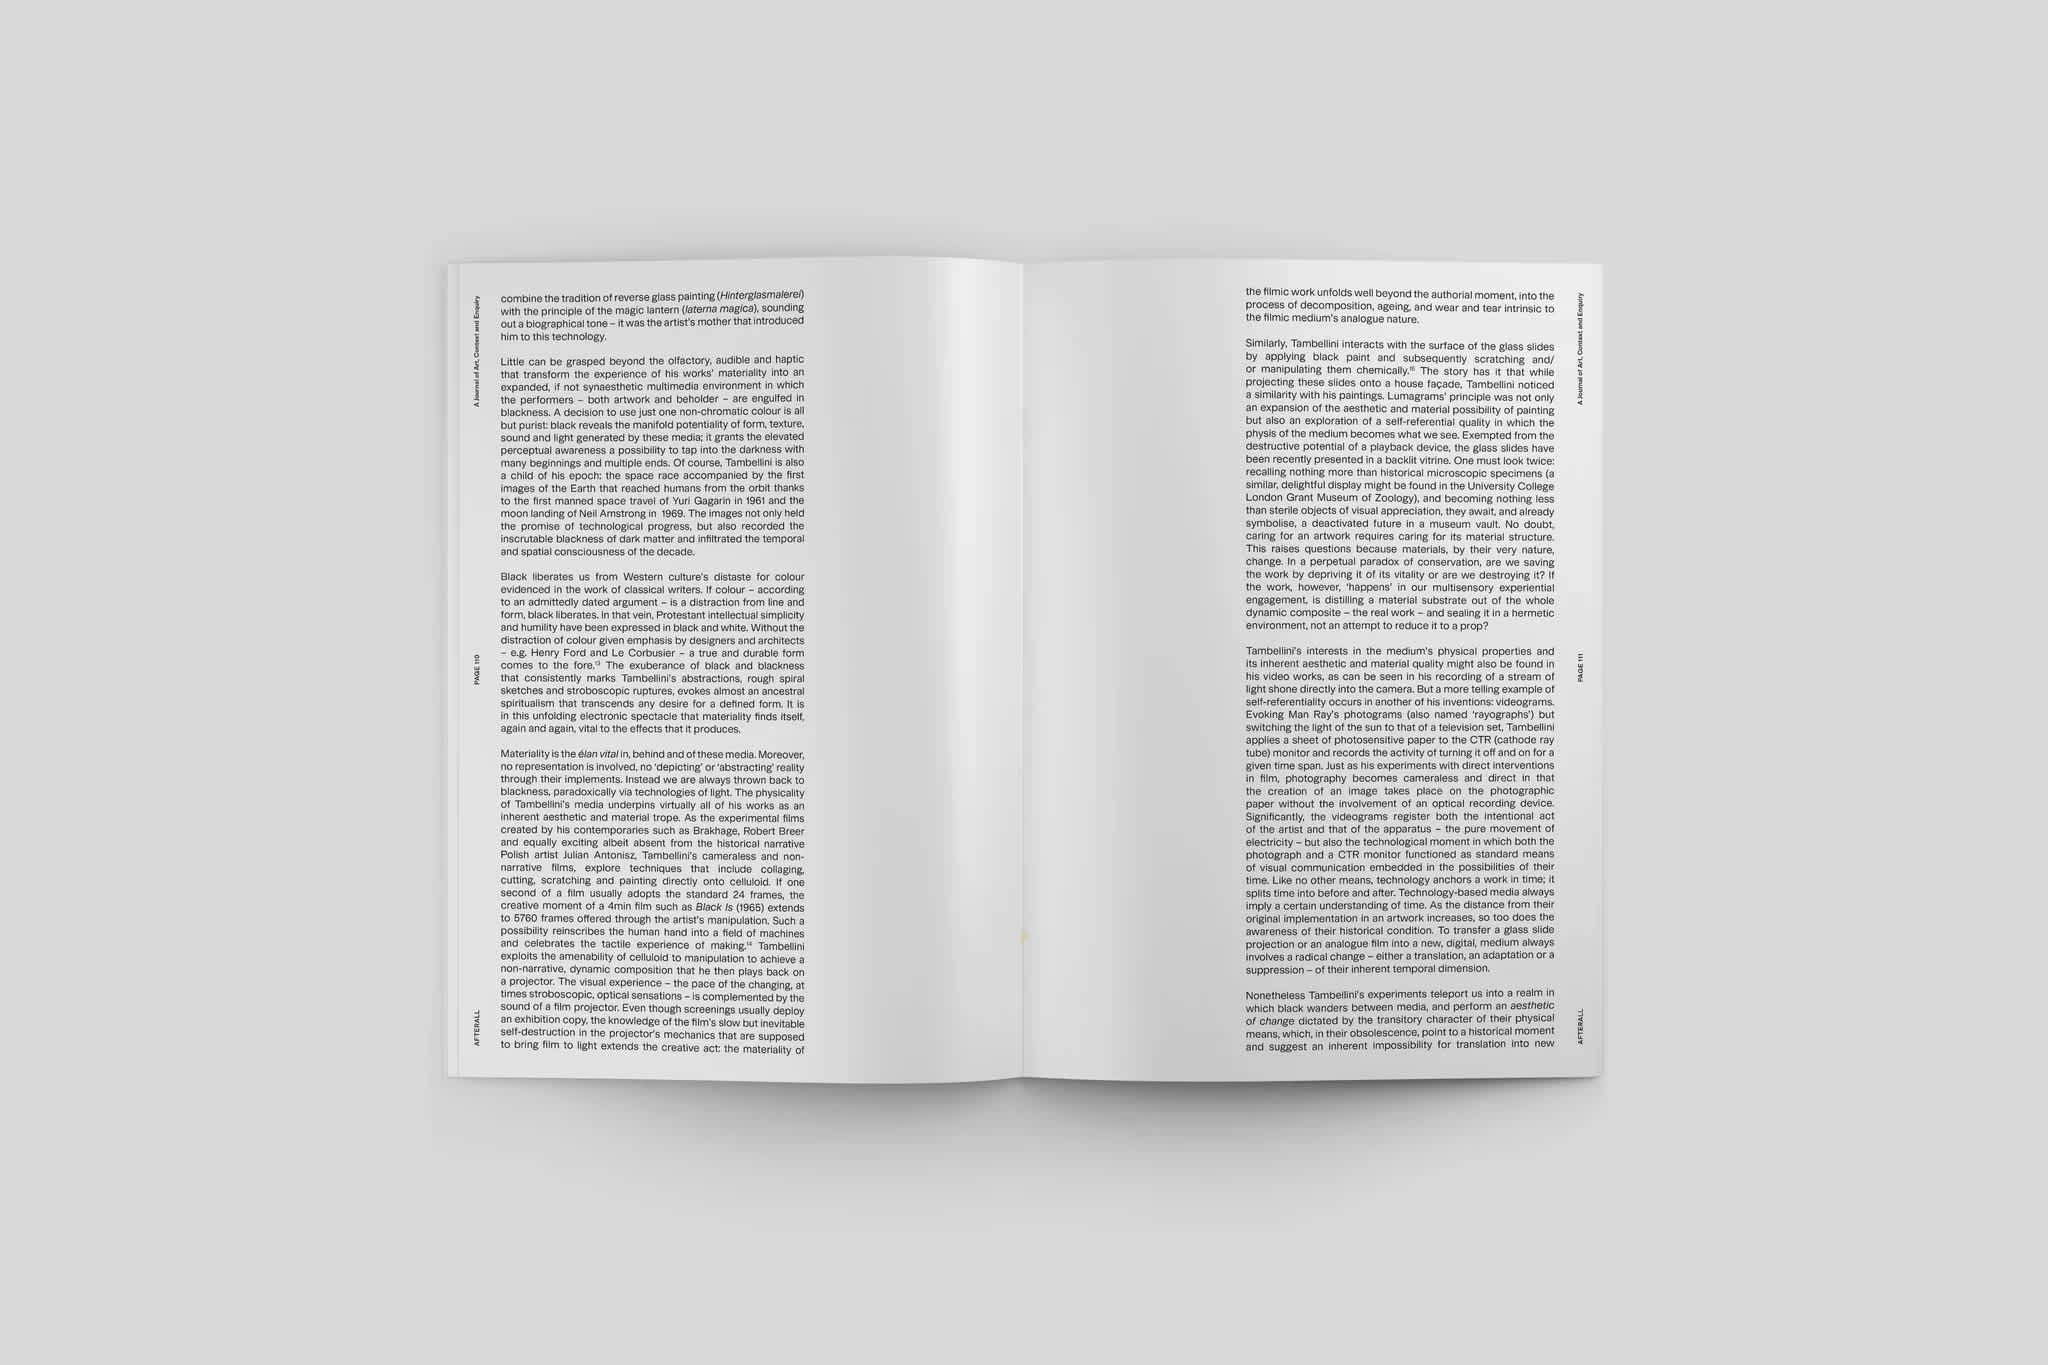 Magazine interior with text on the left and right pages. The text is aligned to the outside edges of the pages.